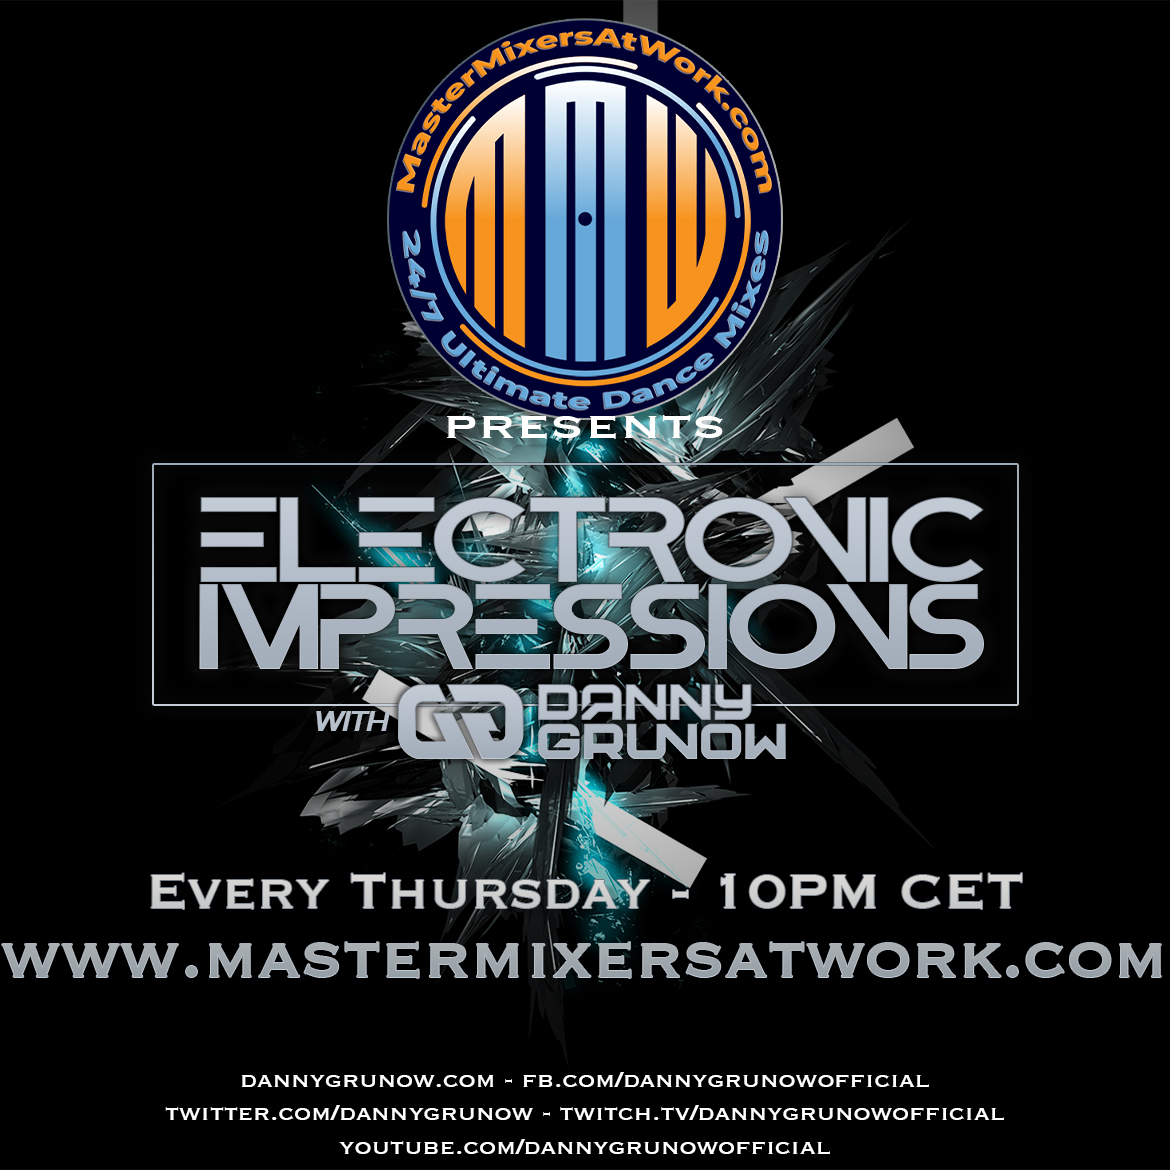 Now live on mastermixersatwork.com

Electronic Impressions 859 with Danny Grunow

Tune in and enjoy the music.

#Trance #Trancelovers #Trancefamily #UpliftingTrance #VocalTrance #TechTrance #Radioshow #Podcast